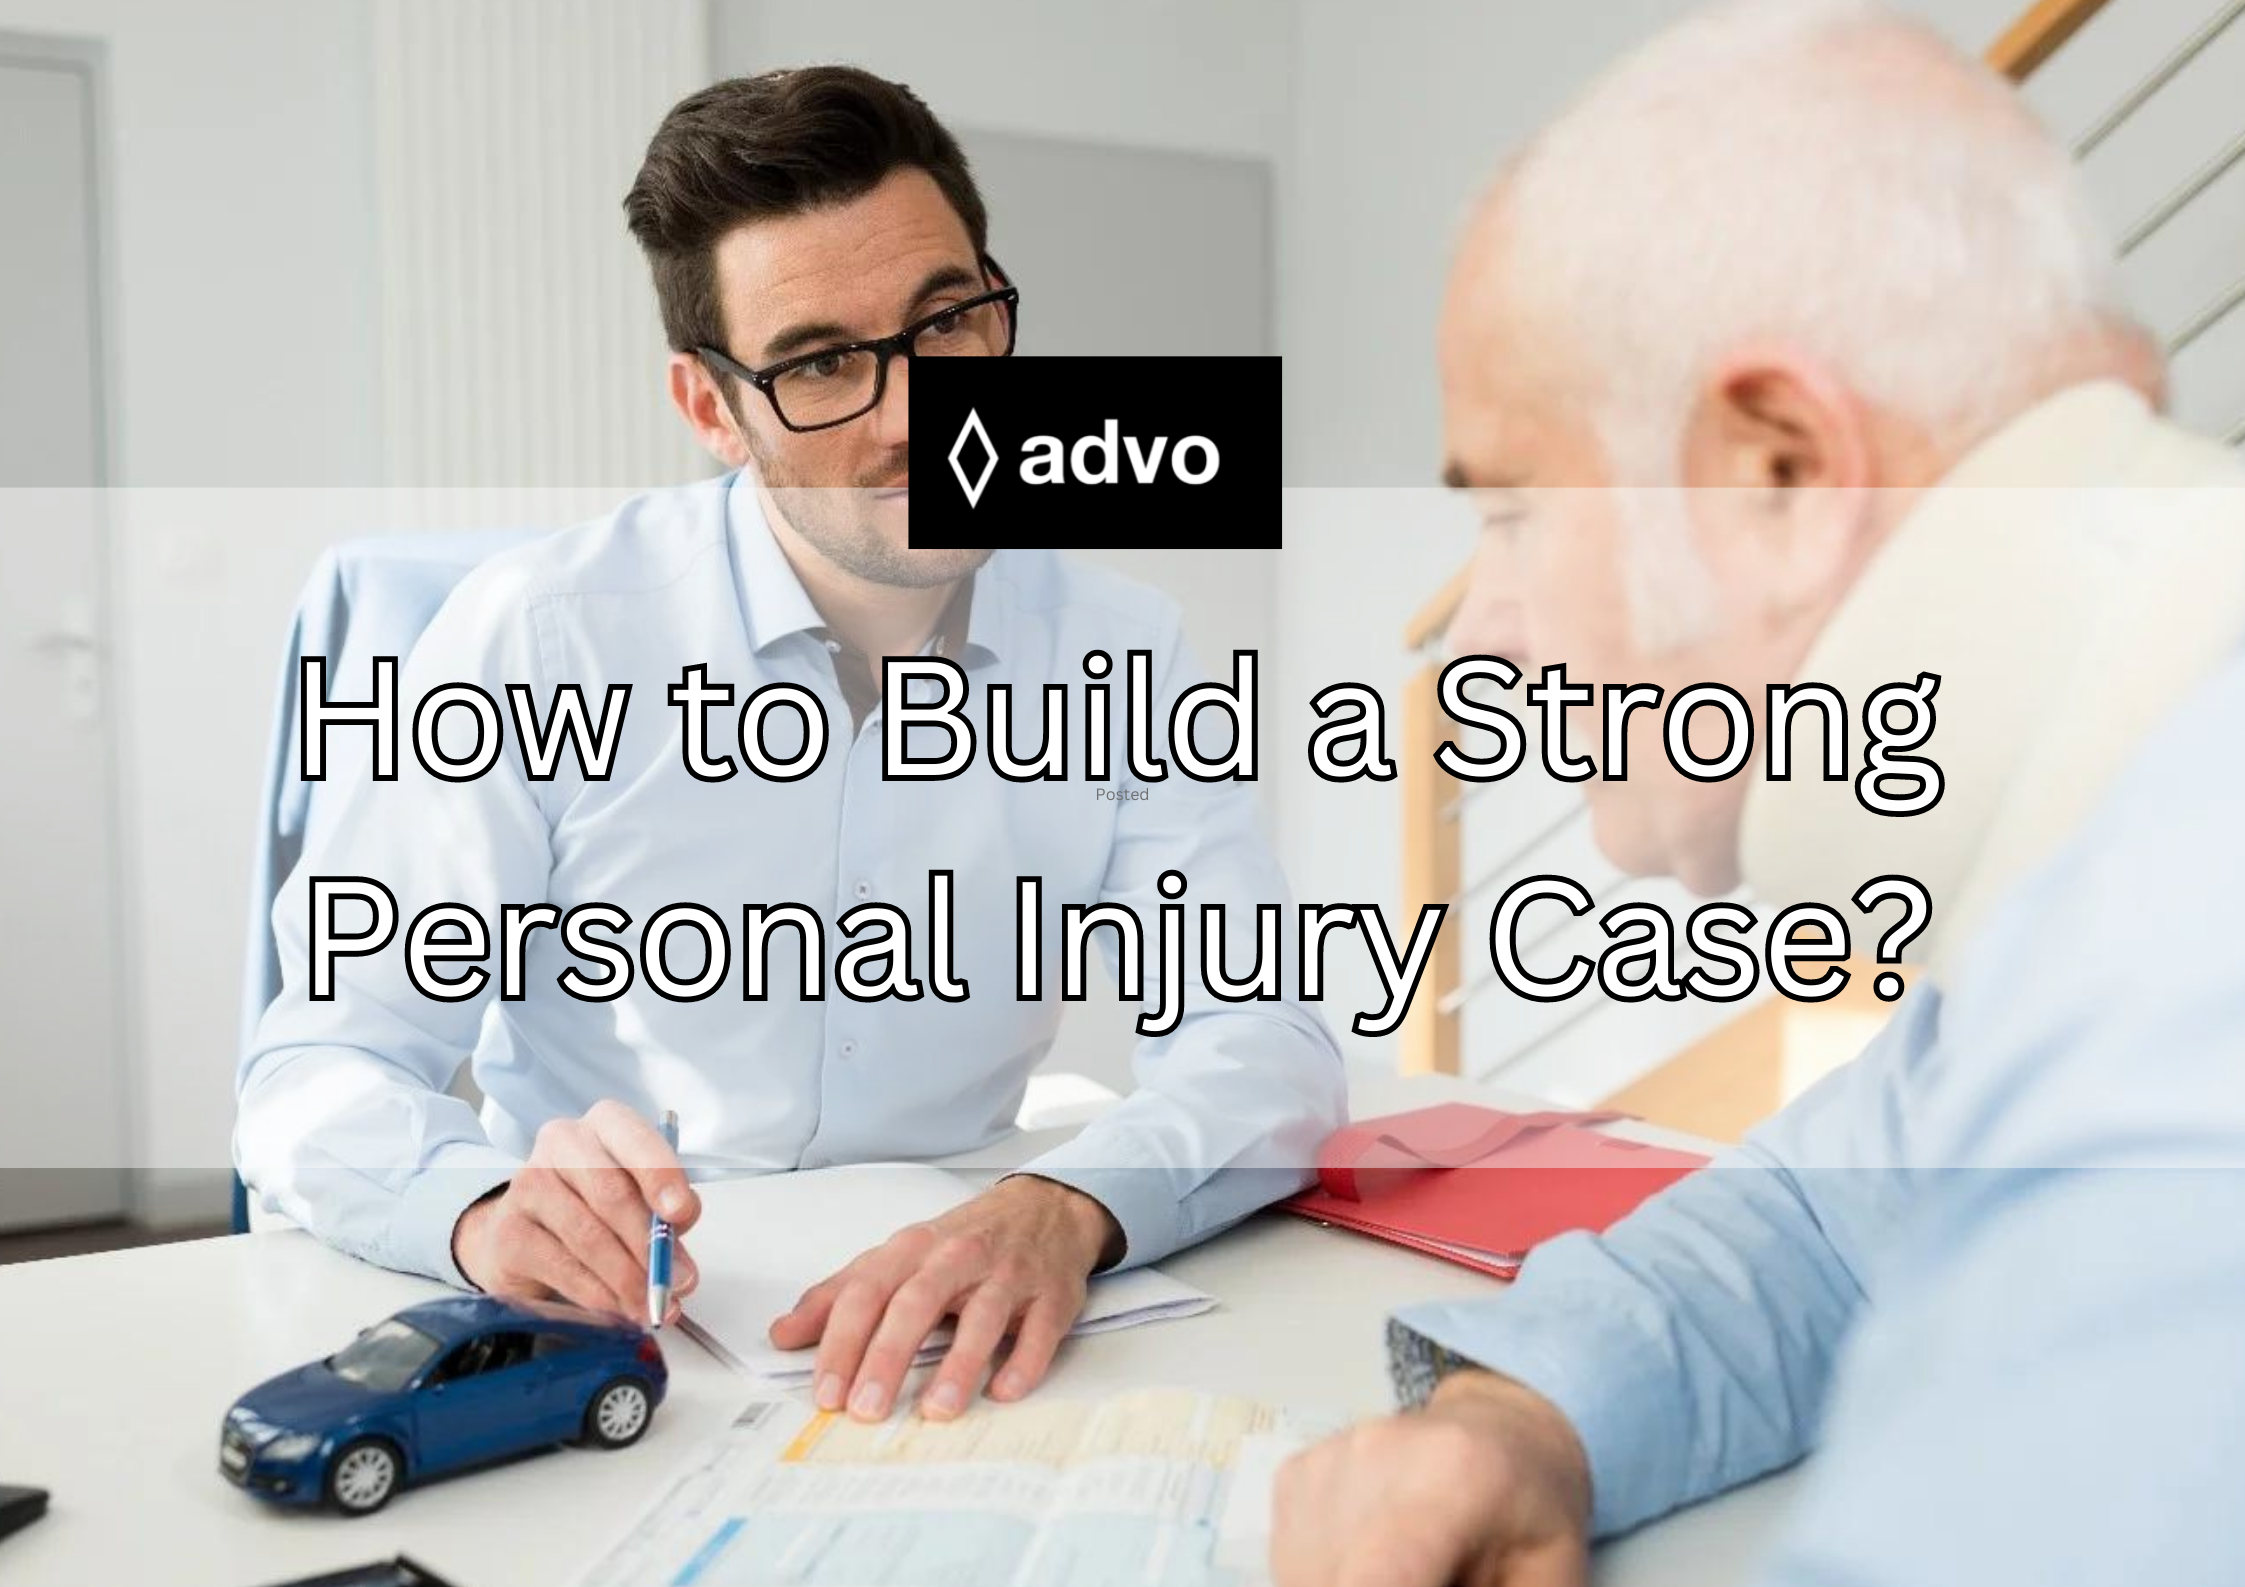 Law firm offering free consultation for personal injury in California